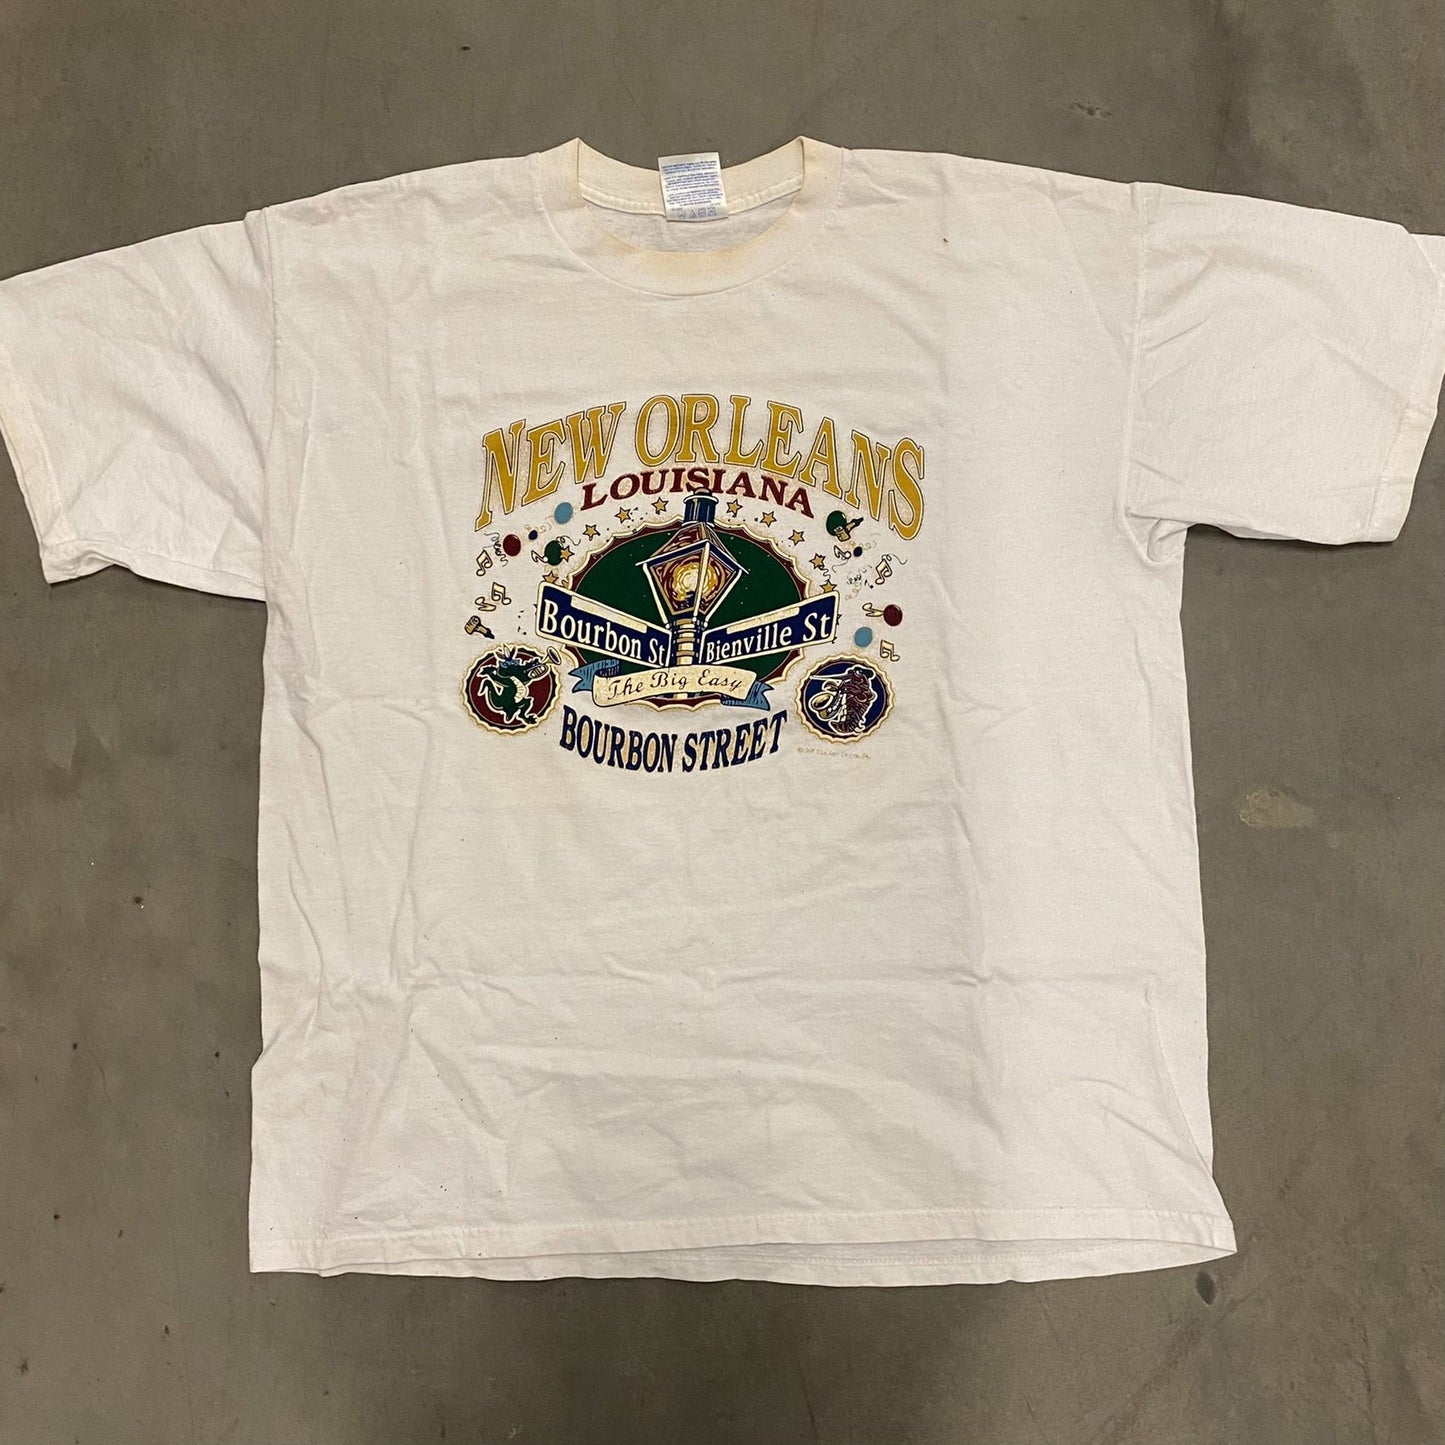 New Orleans Louisiana Vintage T-Shirt – Agent Thrift